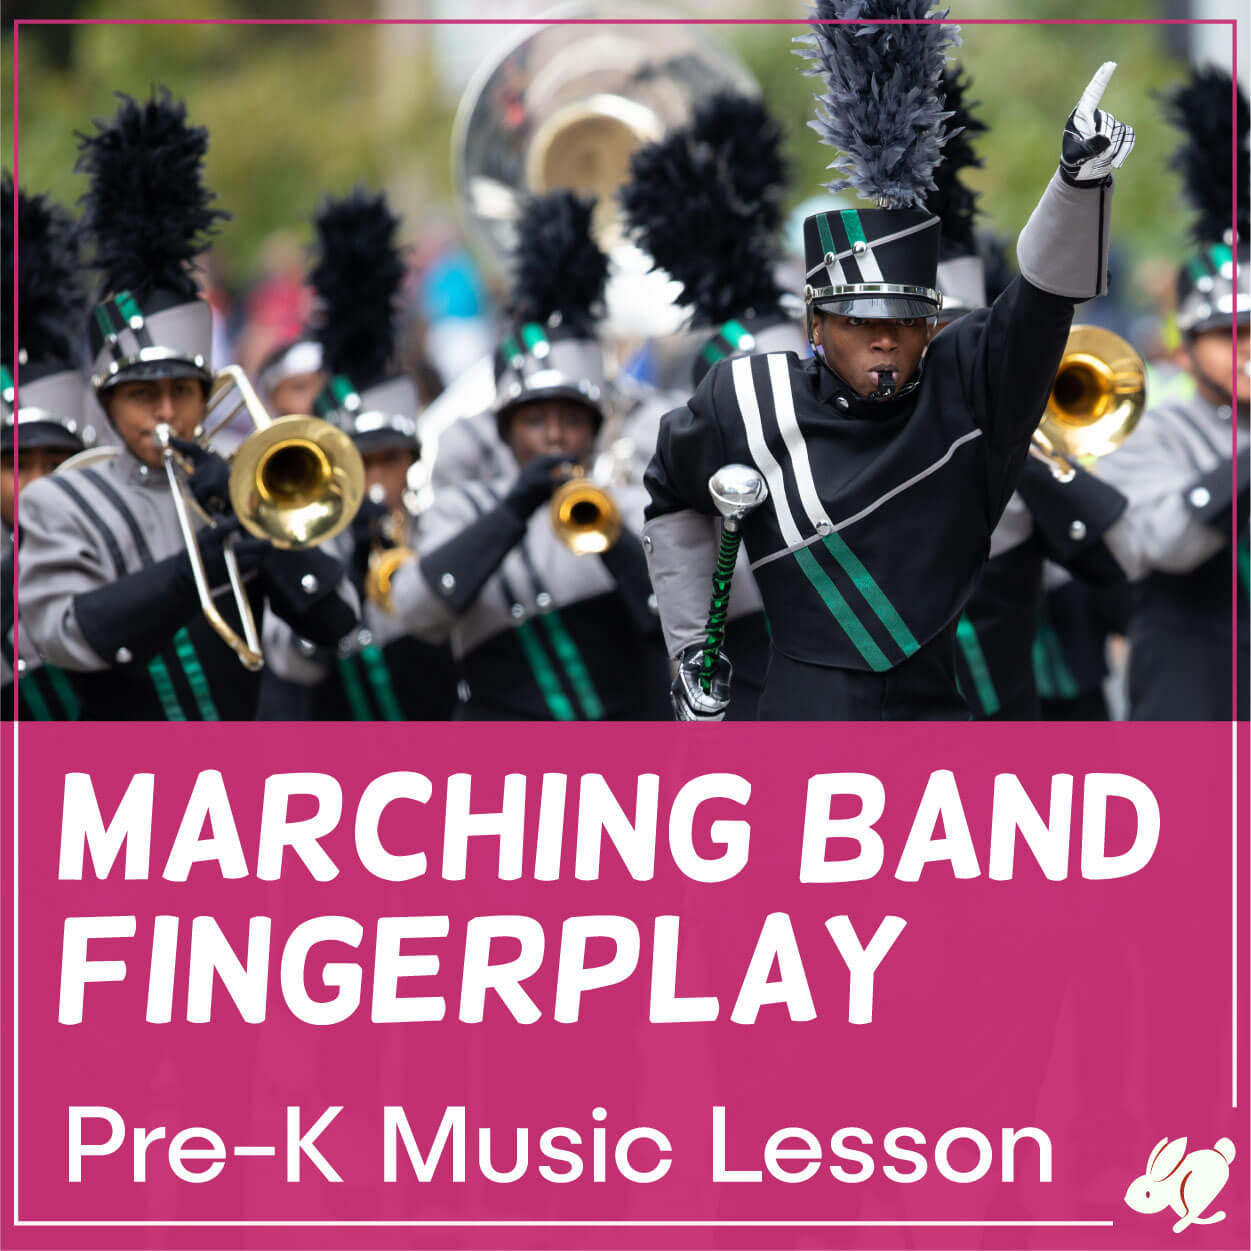 A Marching Band Fingerplay Lesson for Toddlers & PreK